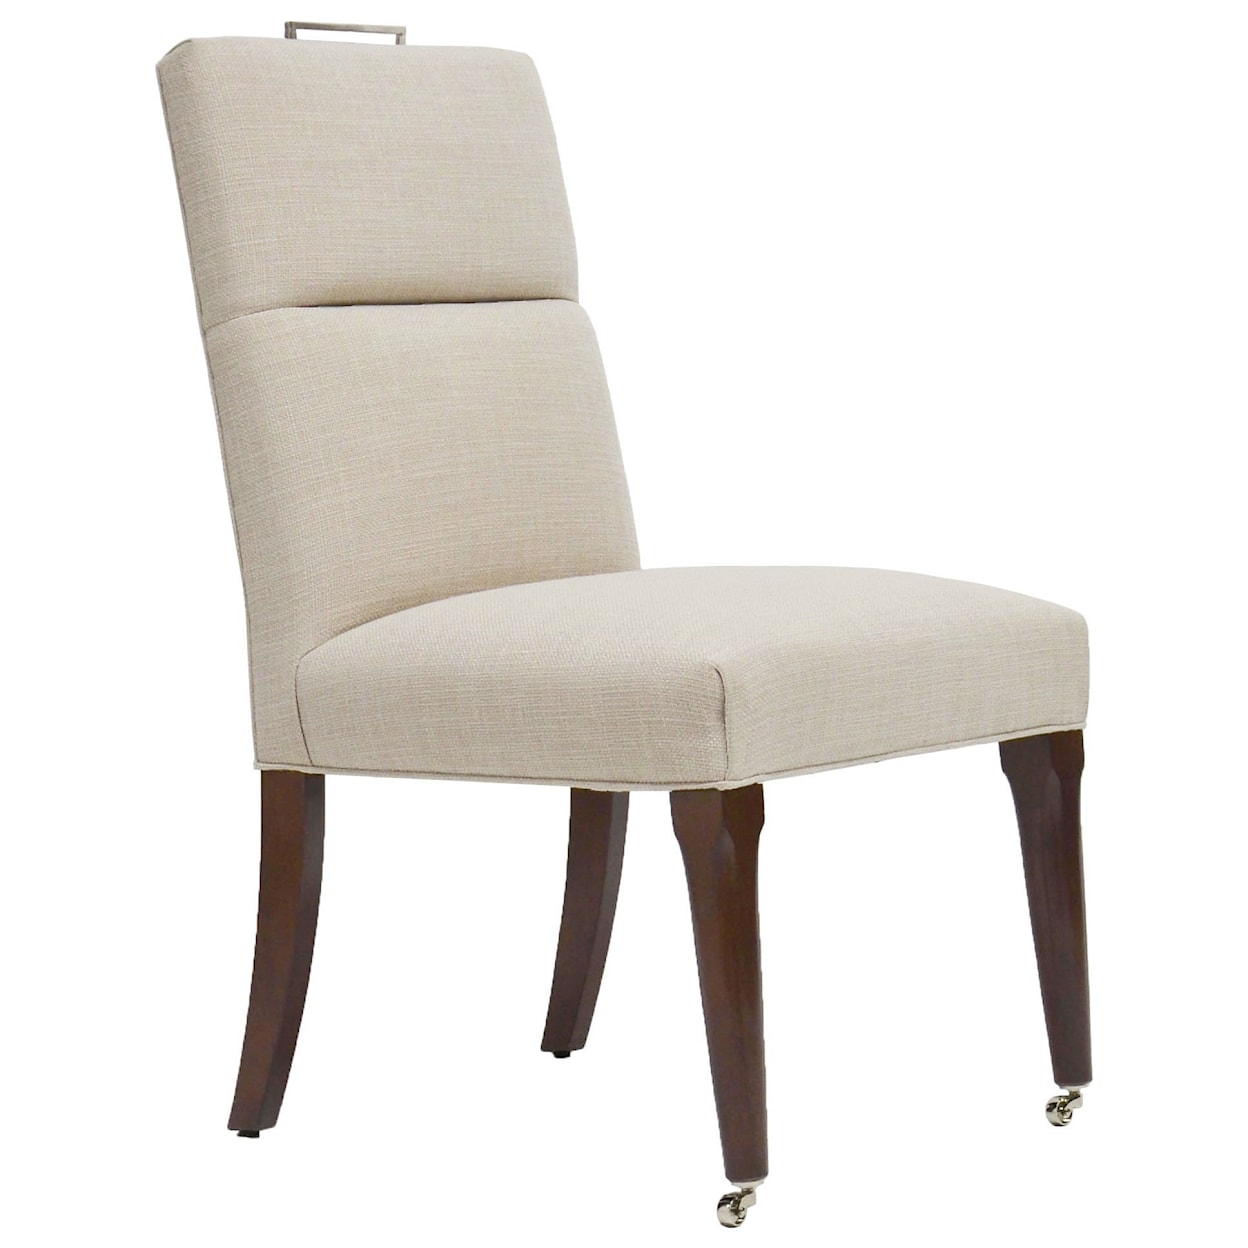 Vanguard Furniture Thom Filicia Home Collection Brattle Road Side Chair